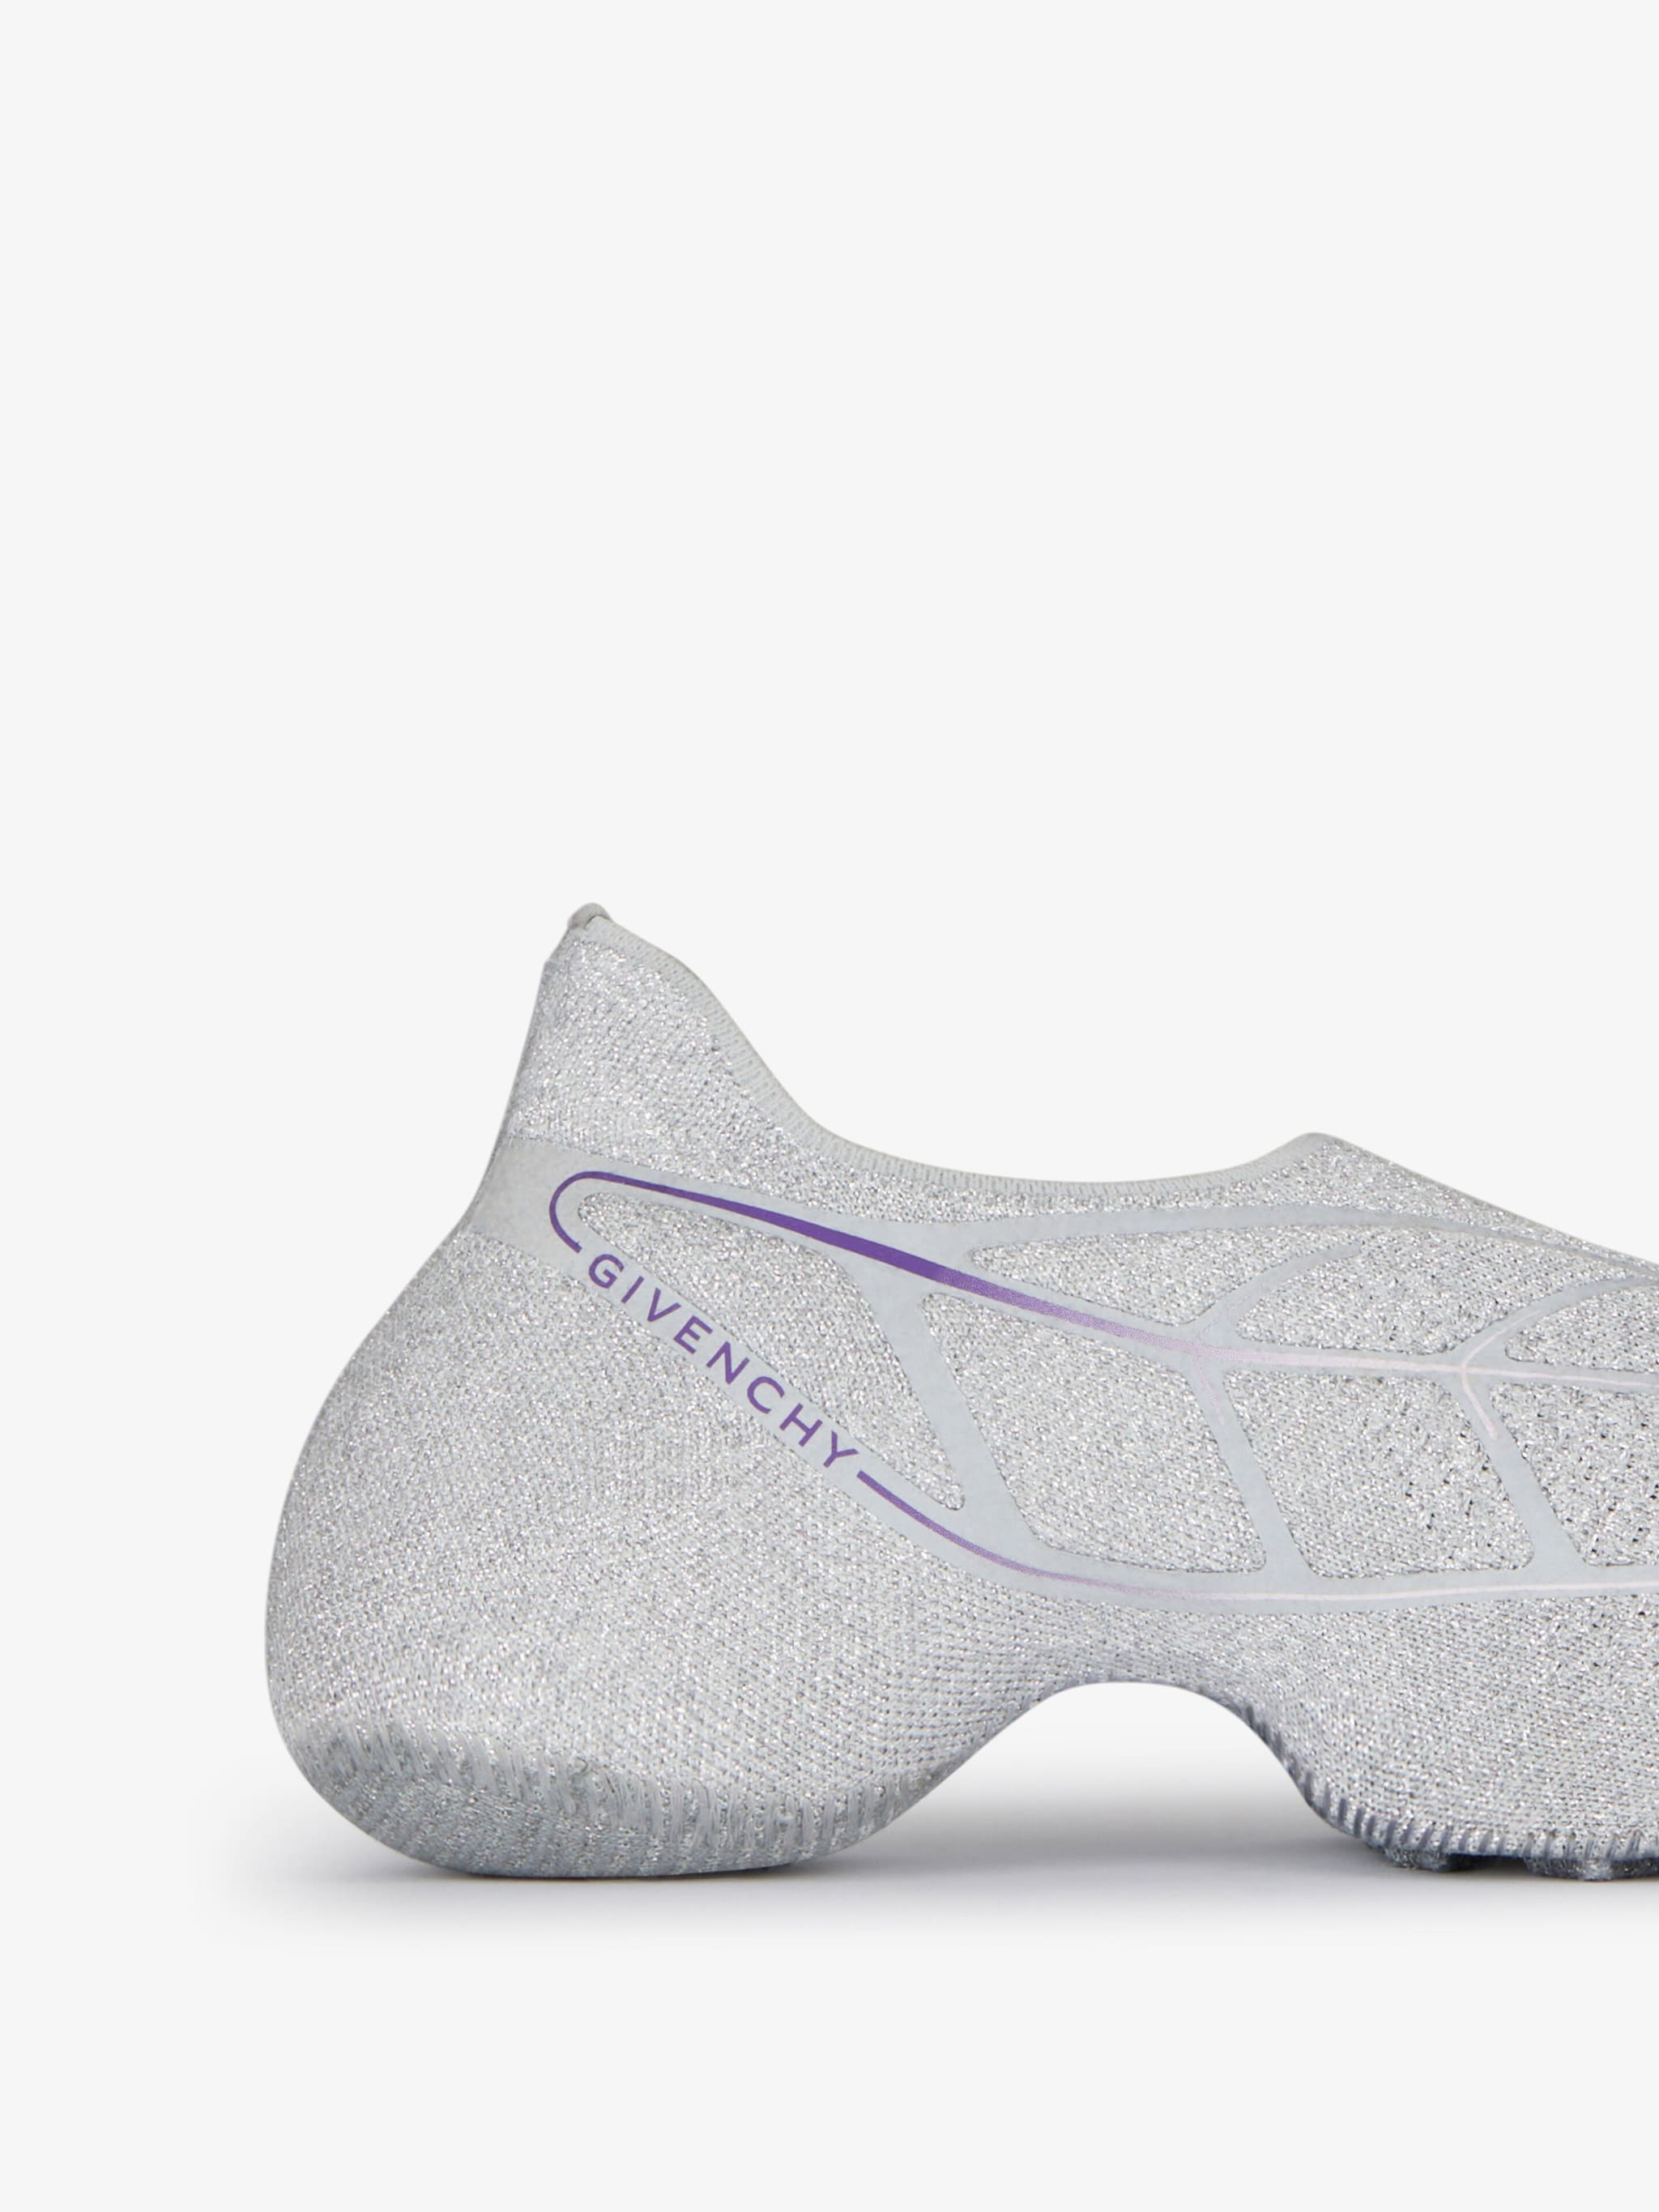 Givenchy TK-360+ Sneakers In Mesh Grey/ Purple